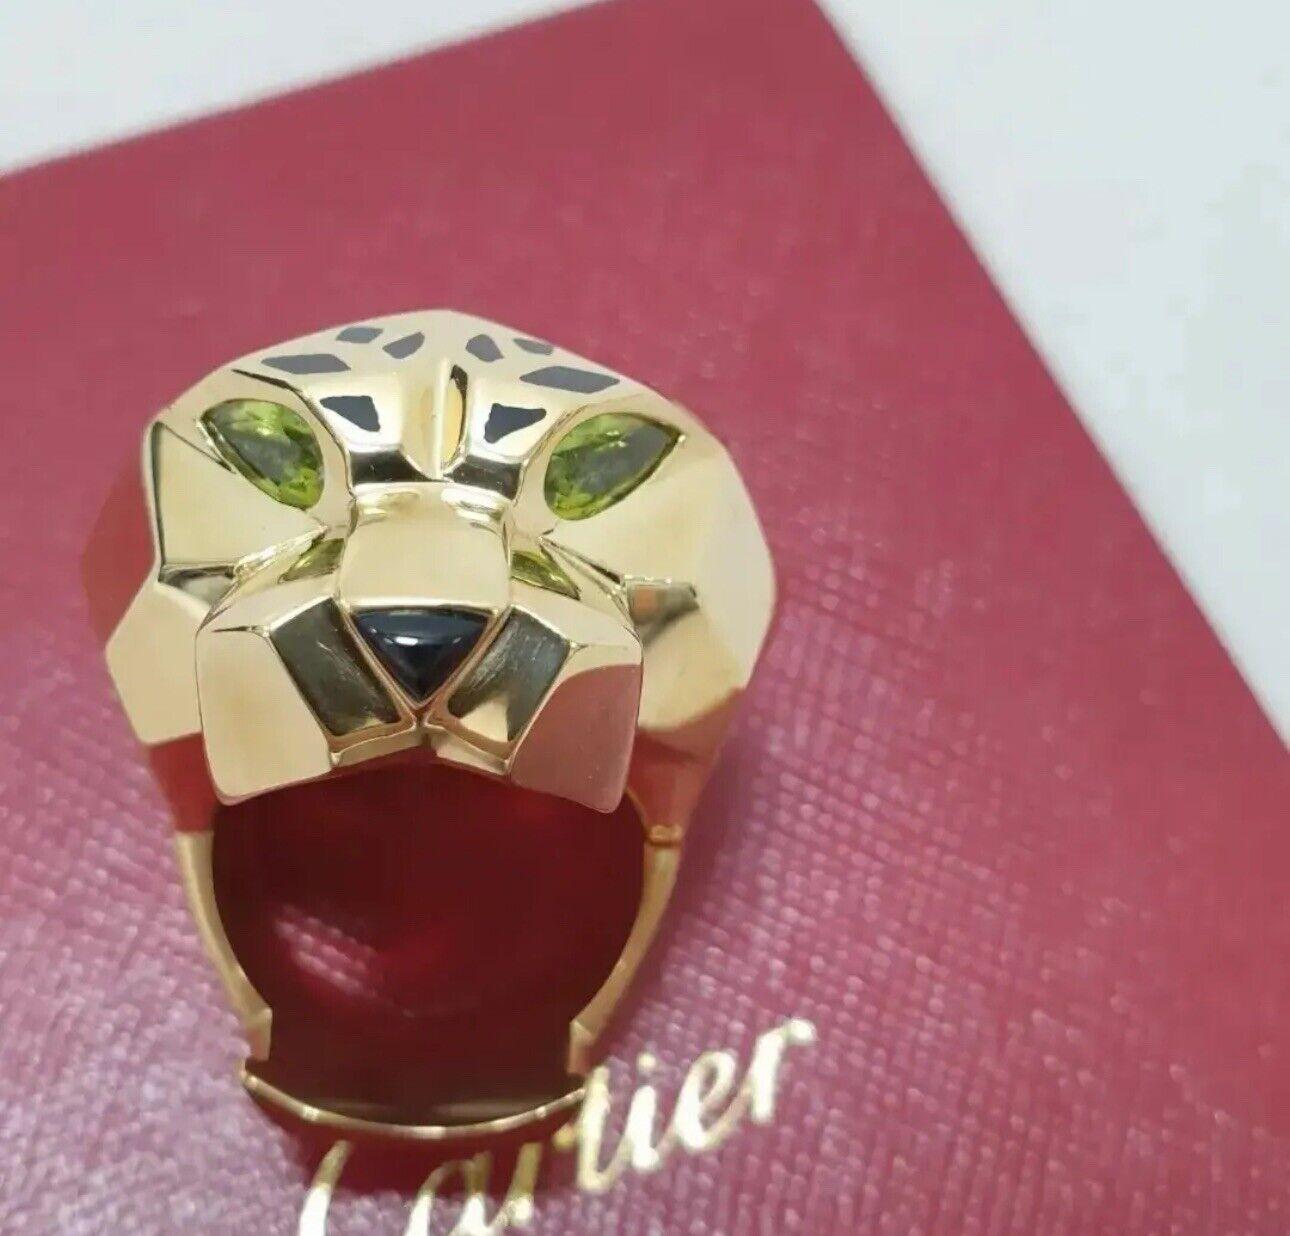 CARTIER Panther Head  Yellow Gold Ring

Comes with Cartier box & Certificate

Size 56

Very good condition